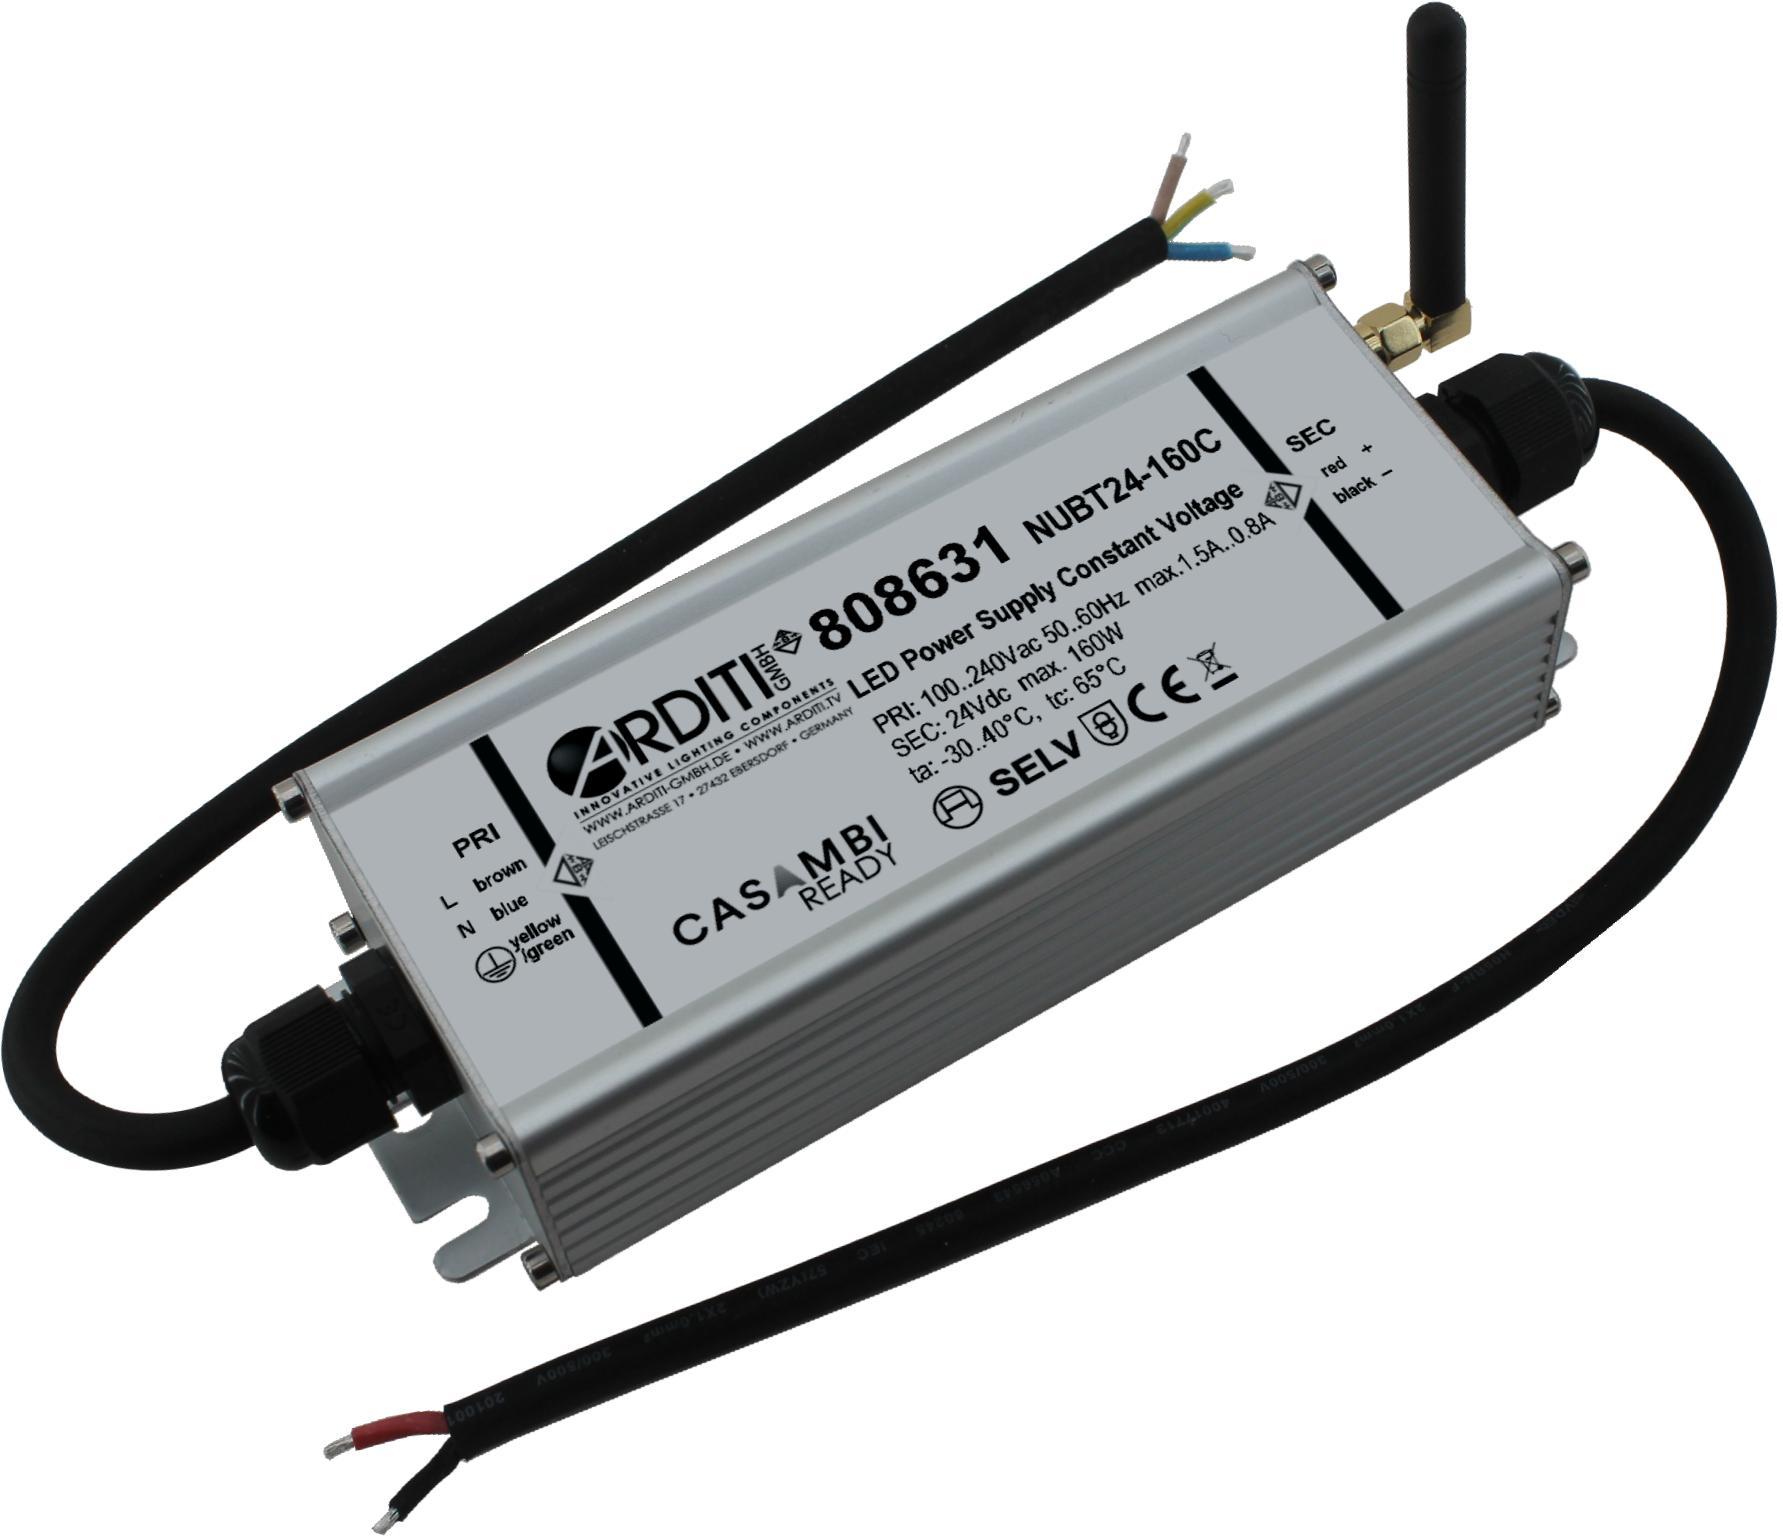 LED Power Supply Constant Voltage - Casambi